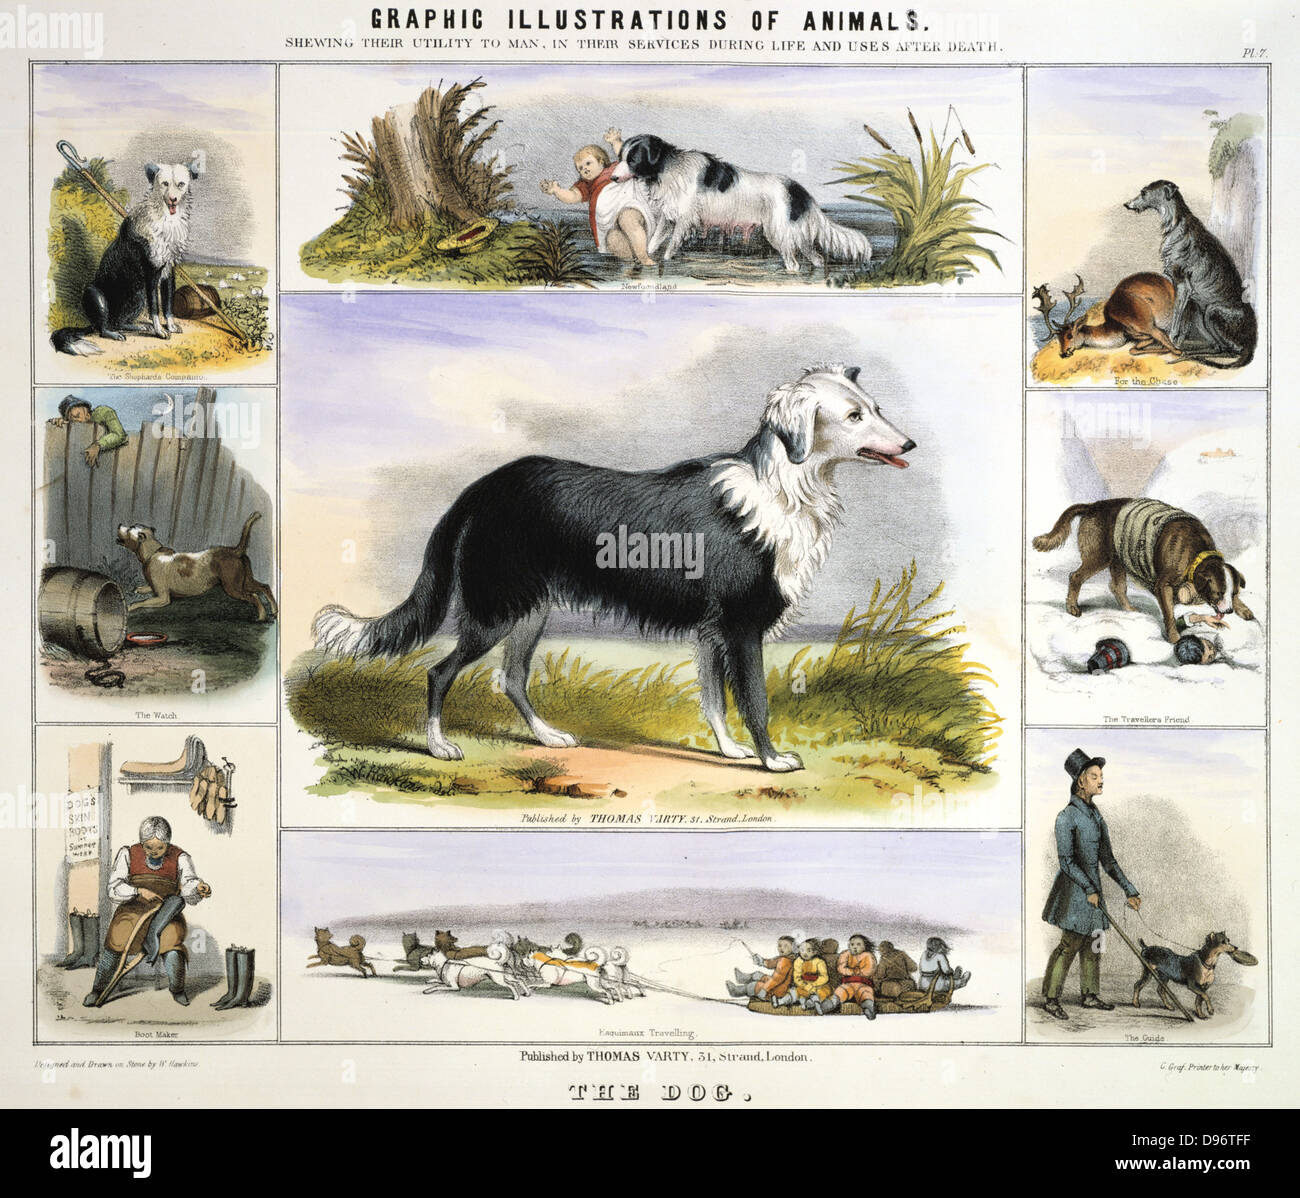 The Dog: Collie sheepdog; Newfoundland for water rescue; Deerhound for hunting; St Bernard rescuing travellers in the snow; Husky pulling a sledge; Dog skin for boots; Guard dog to deter burglars. Hand-coloured lithograph by Waterhouse Hawkins published London c1850. From 'Graphic Illustrations of Animals and Their Utility to Man'. Stock Photo